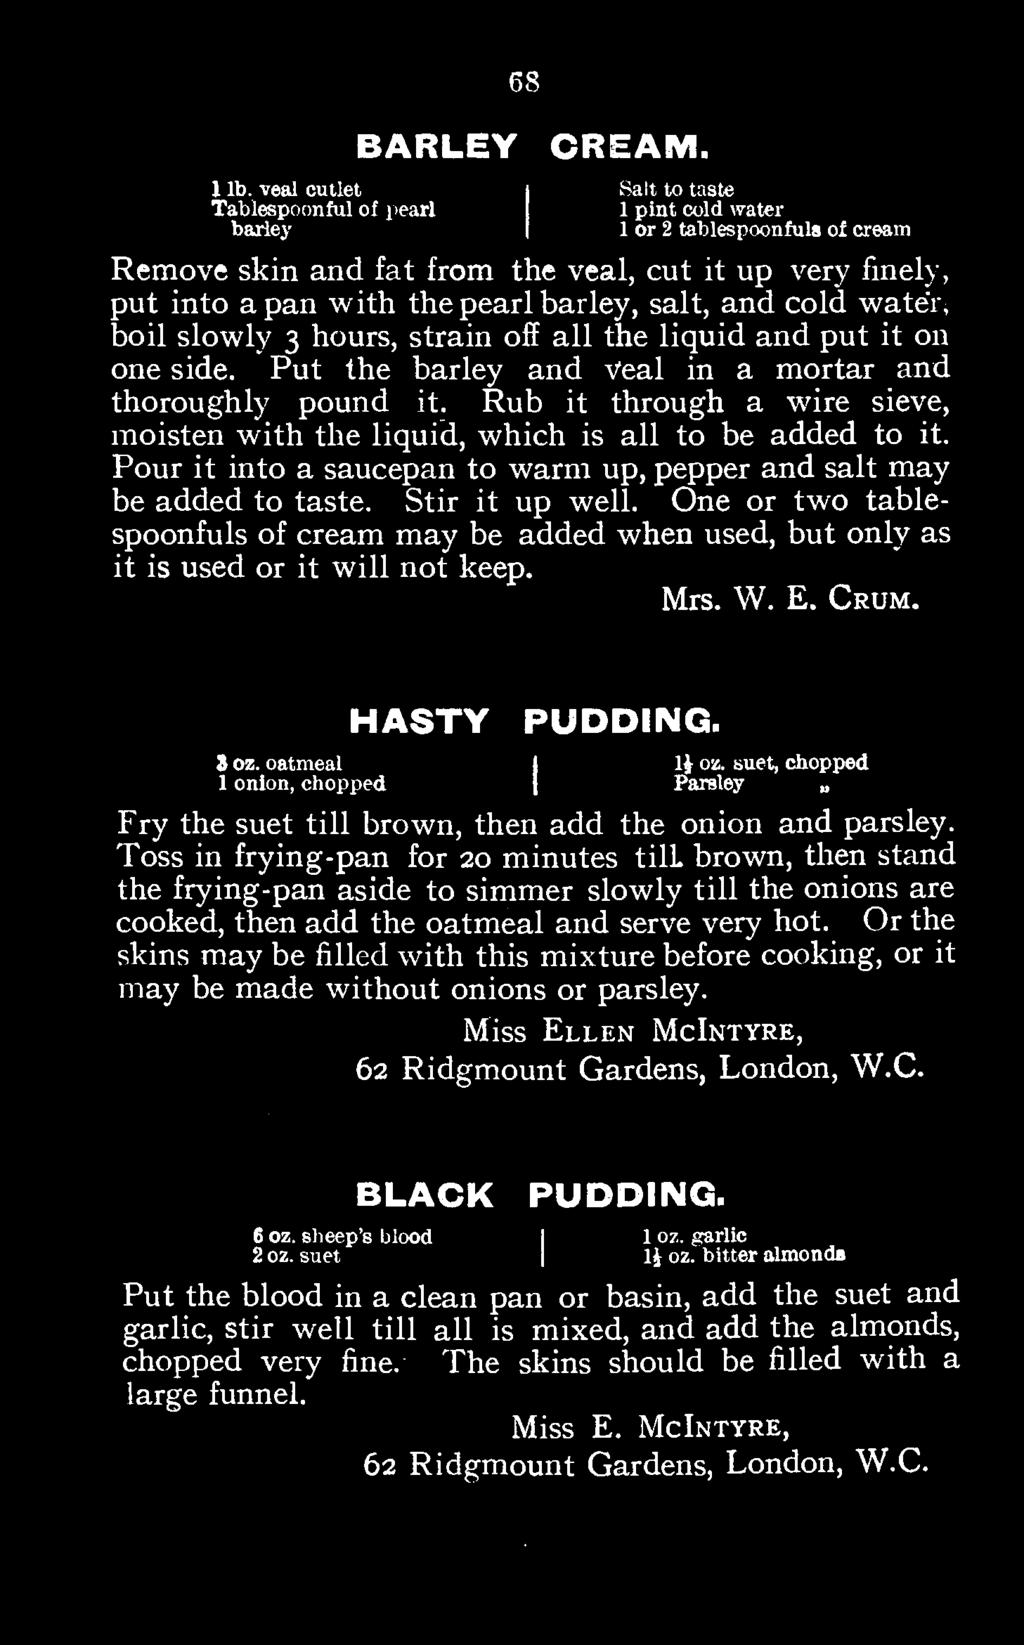 One or two tablespoonfuls of cream may be added when used, but only as it is used or it will not keep. Mrs. W. E. Crum. HASTY PUDDING. 31 oz. onion, oatmeal chopped I Parsley 1J oz.